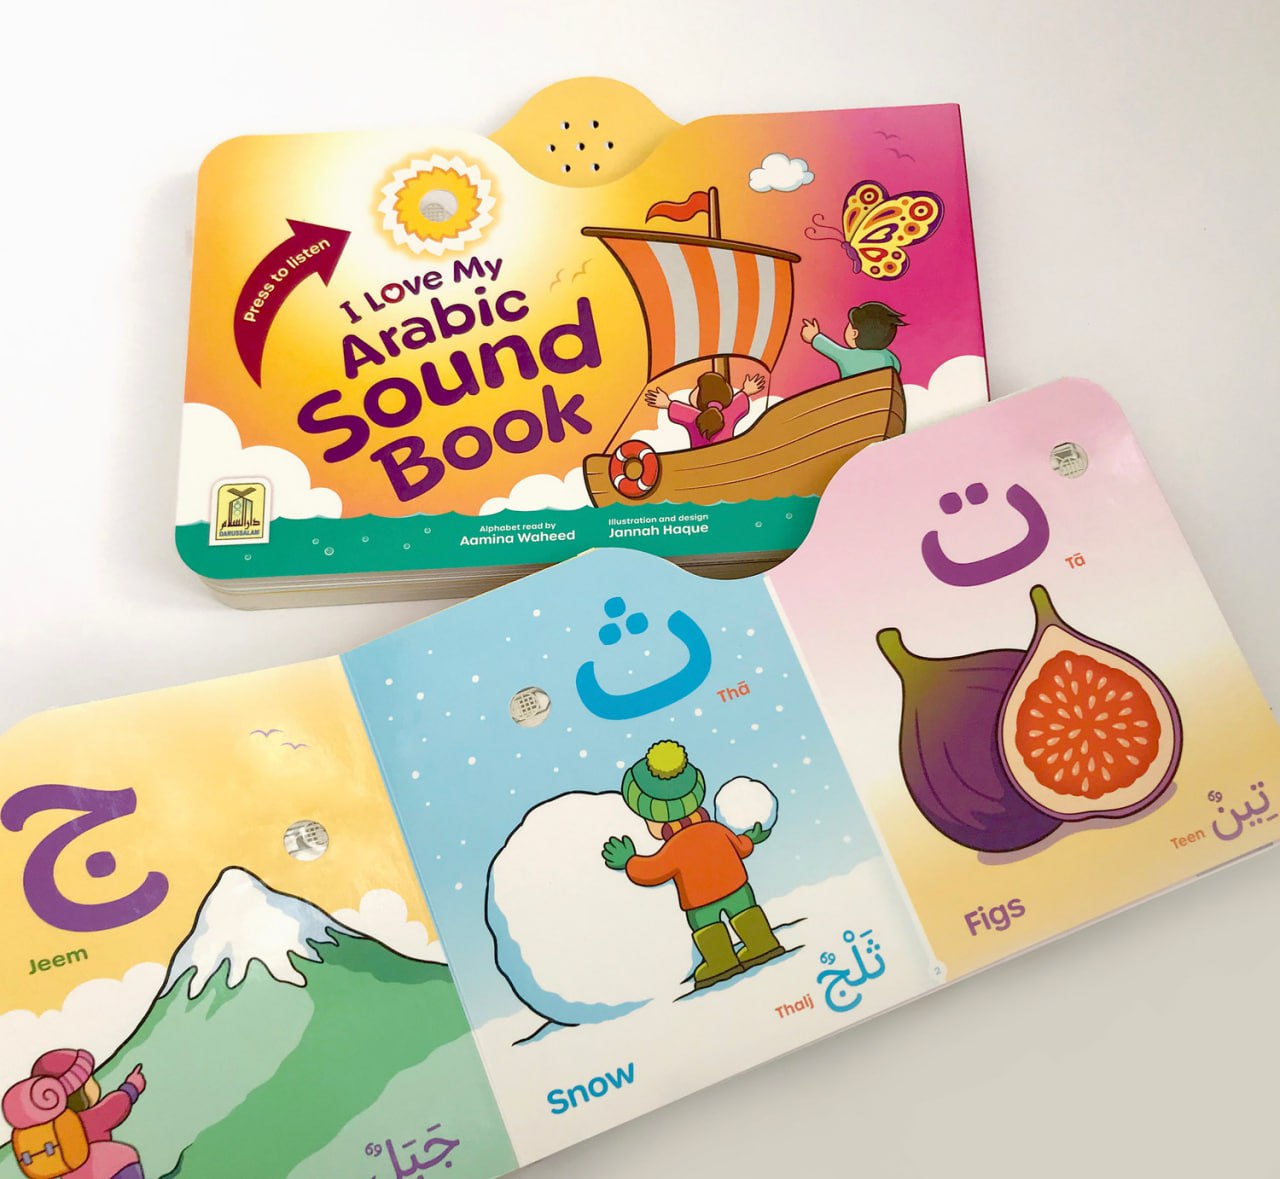 I Love My Arabic Sound Book Pictures without Eyes board book : Read by Aamina Waheed